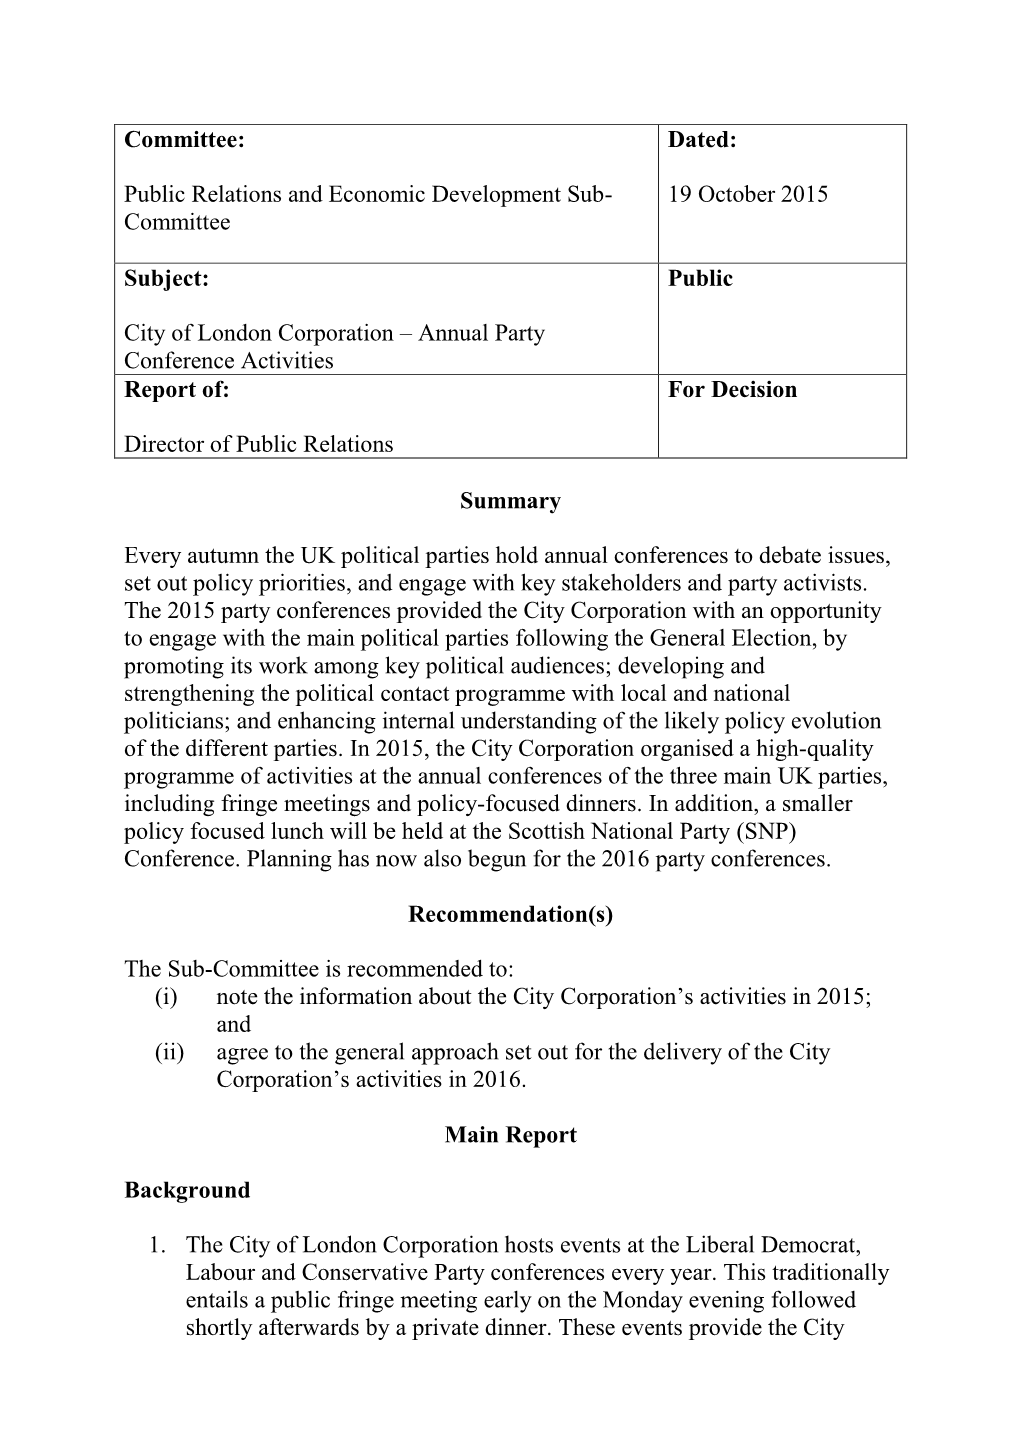 Annual Party Conference Activities PDF